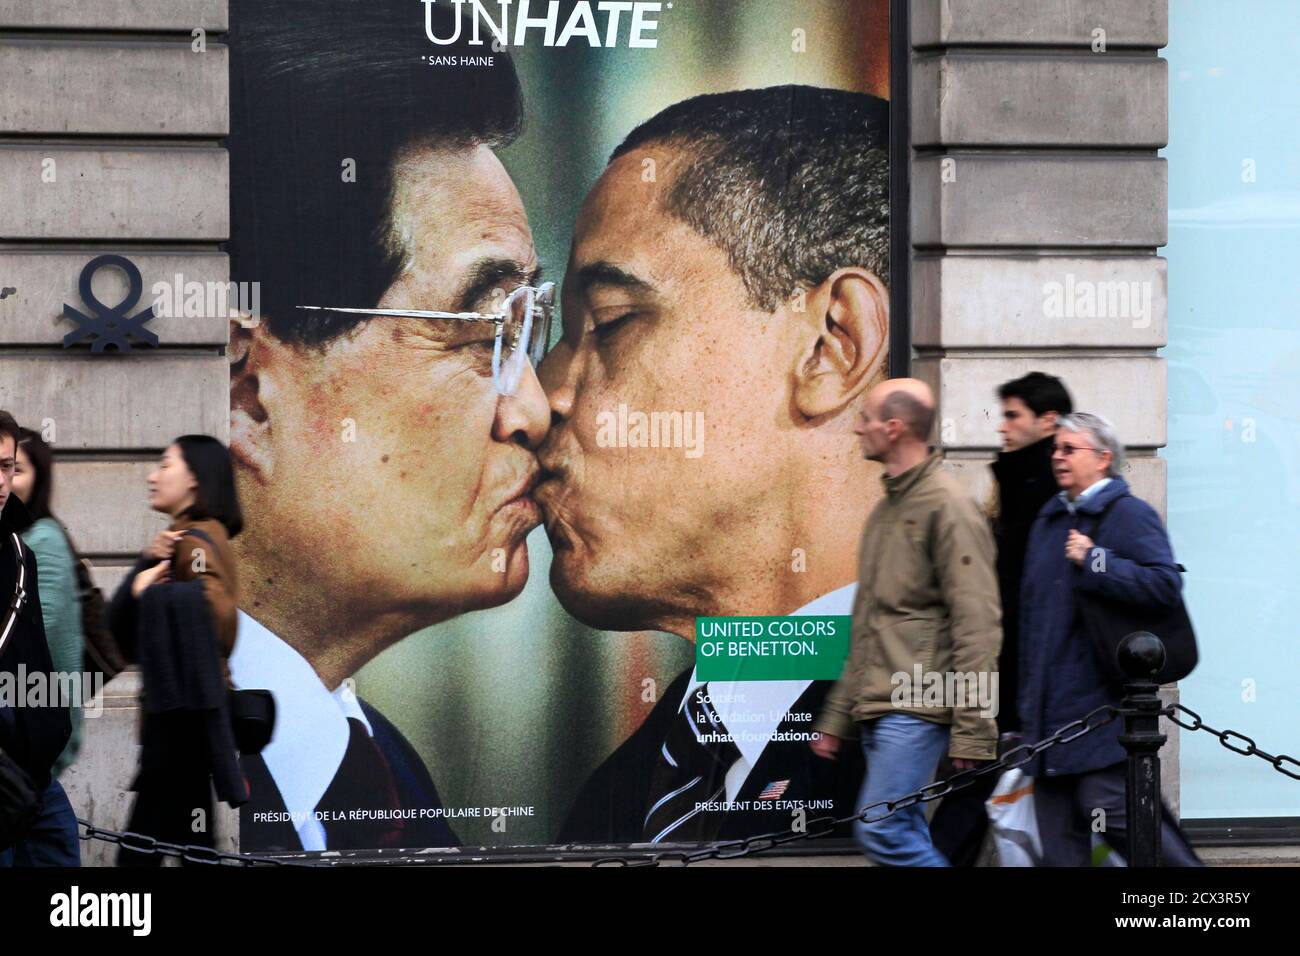 People walk past a billboard showing a photo montage with U.S. President  Barack Obama kissing China's President Hu Jintao displayed on a Benetton  store in Paris November 17, 2011. Photo montages of